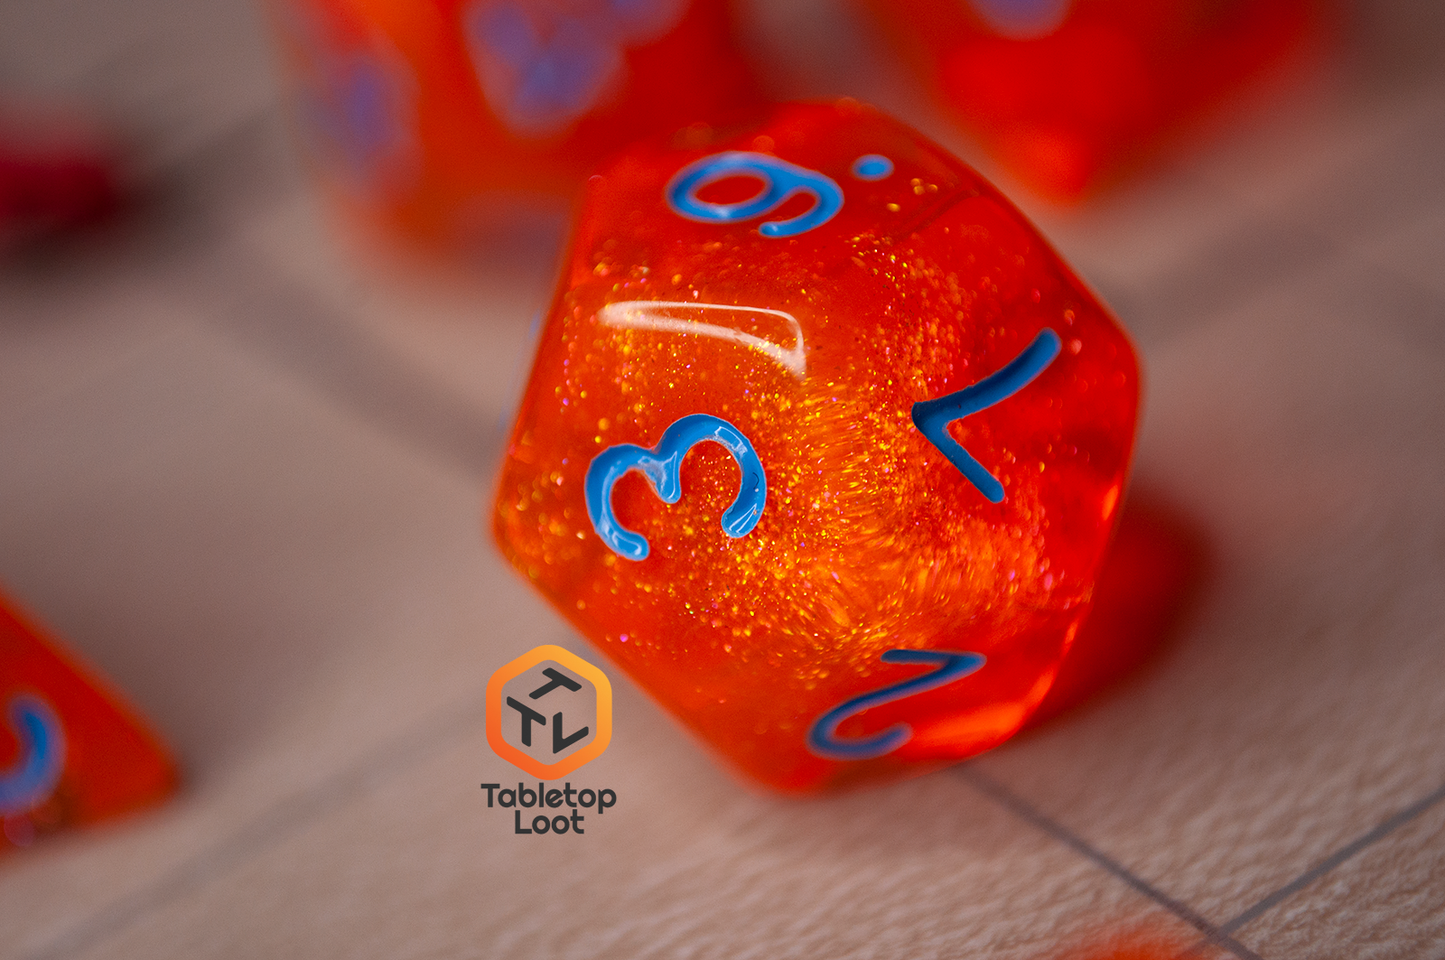 A close up of the D12 from the Radioactive Orange 7 piece dice set from Tabletop Loot with sparkly orange resin and bright blue numbering.